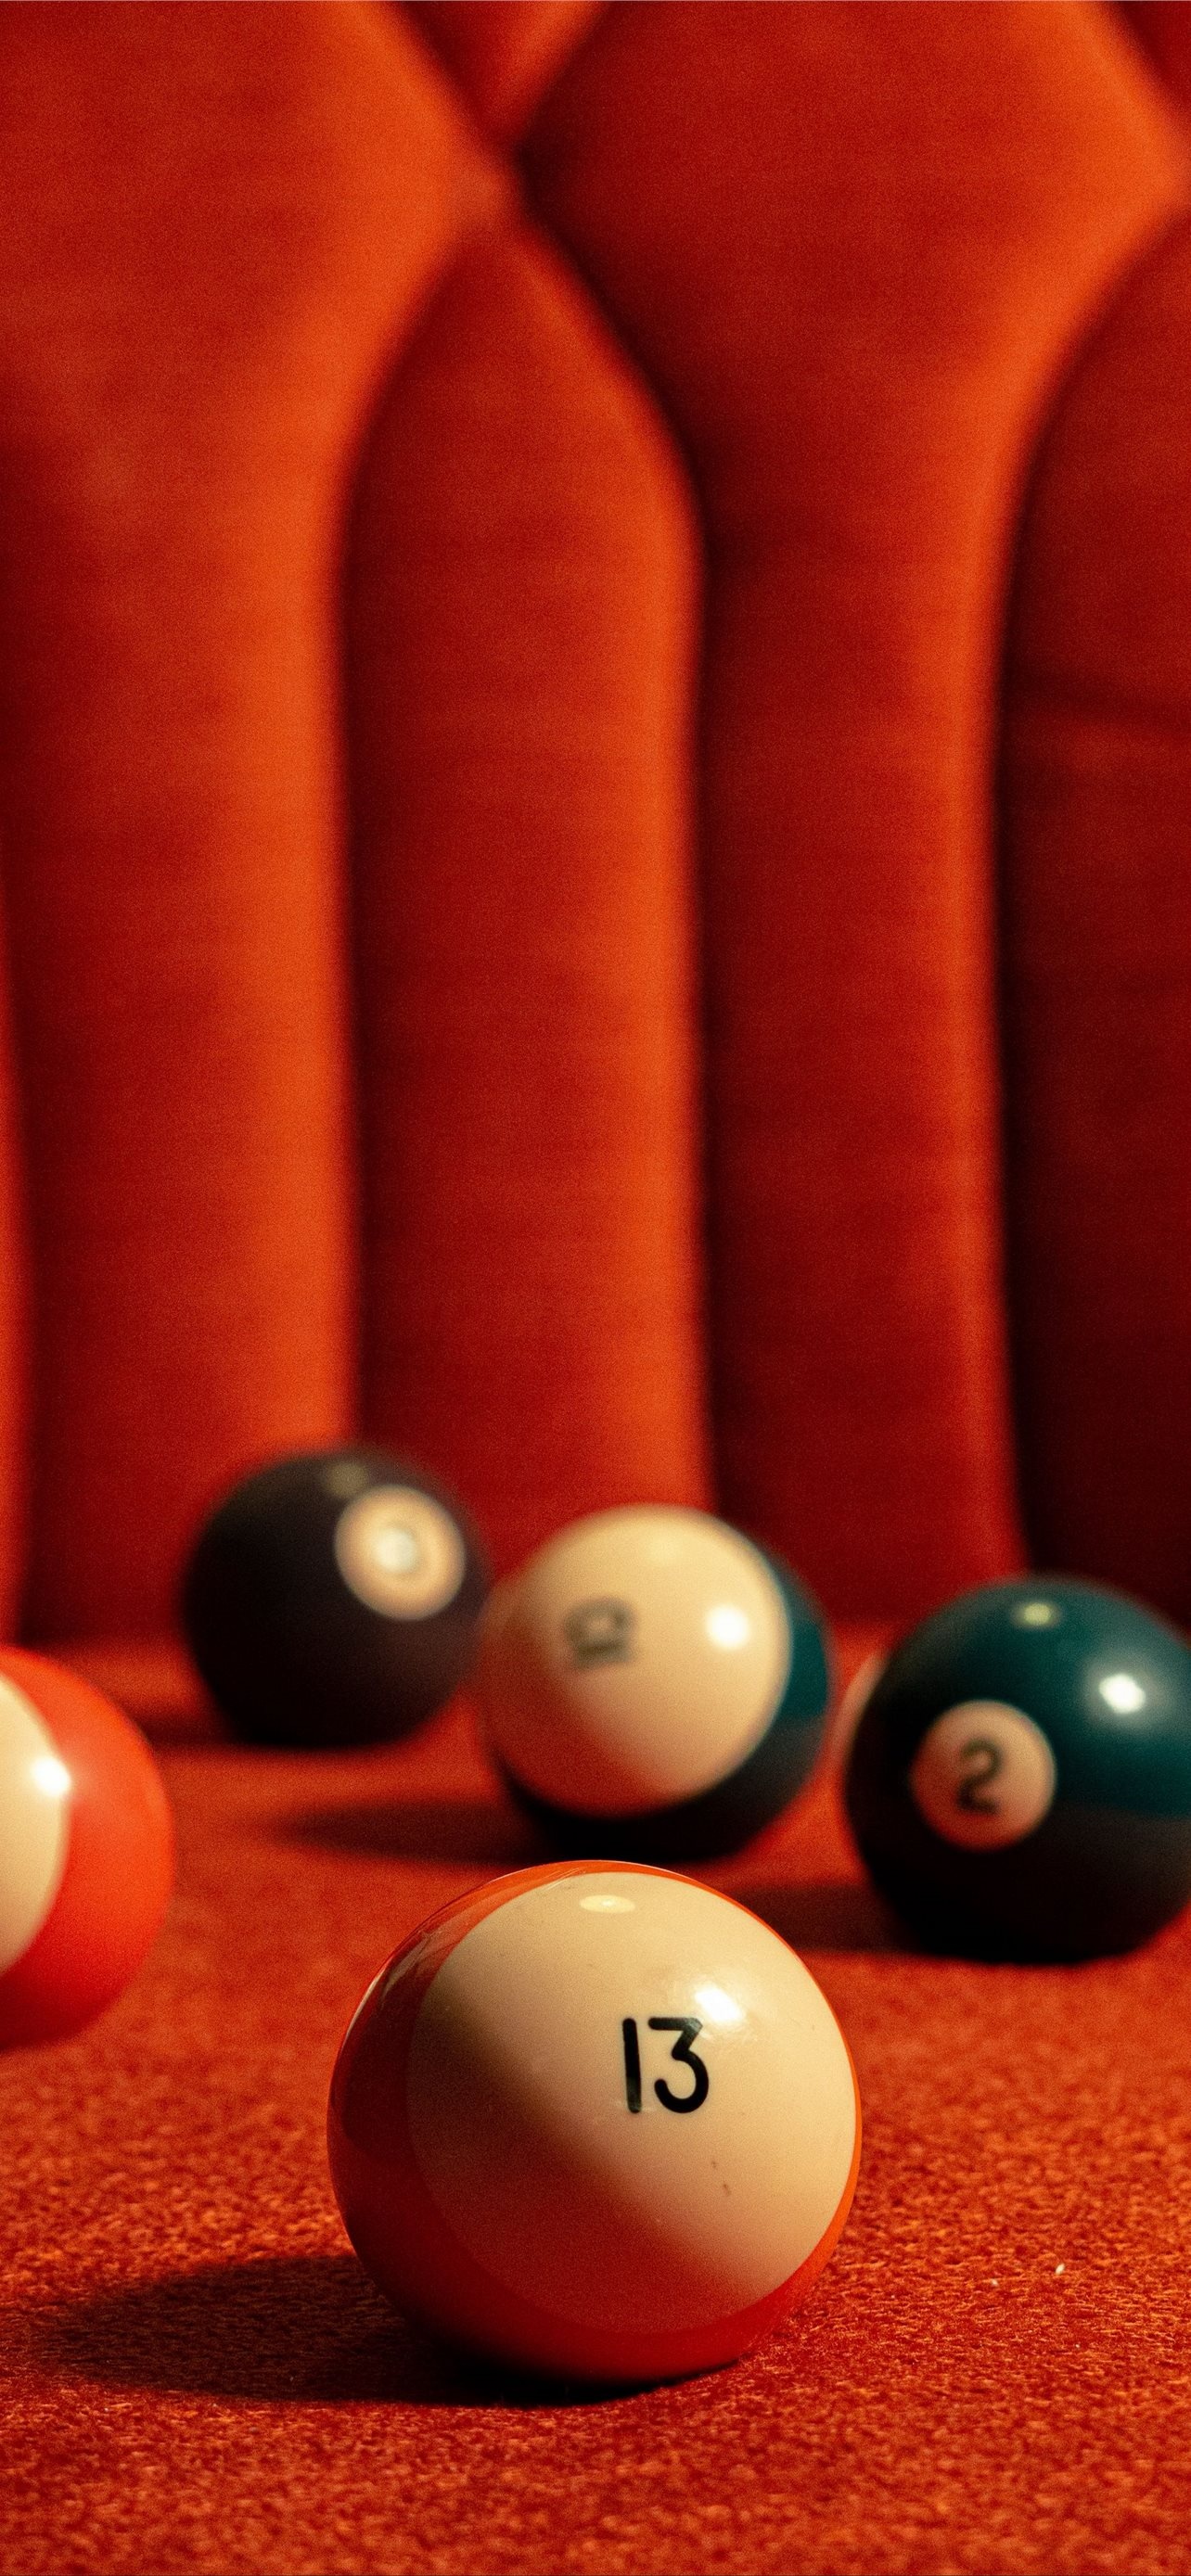 Billiards: Numbered solid balls, Object balls in classic pool and eight-ball style of cue sports, Pool. 1290x2780 HD Background.